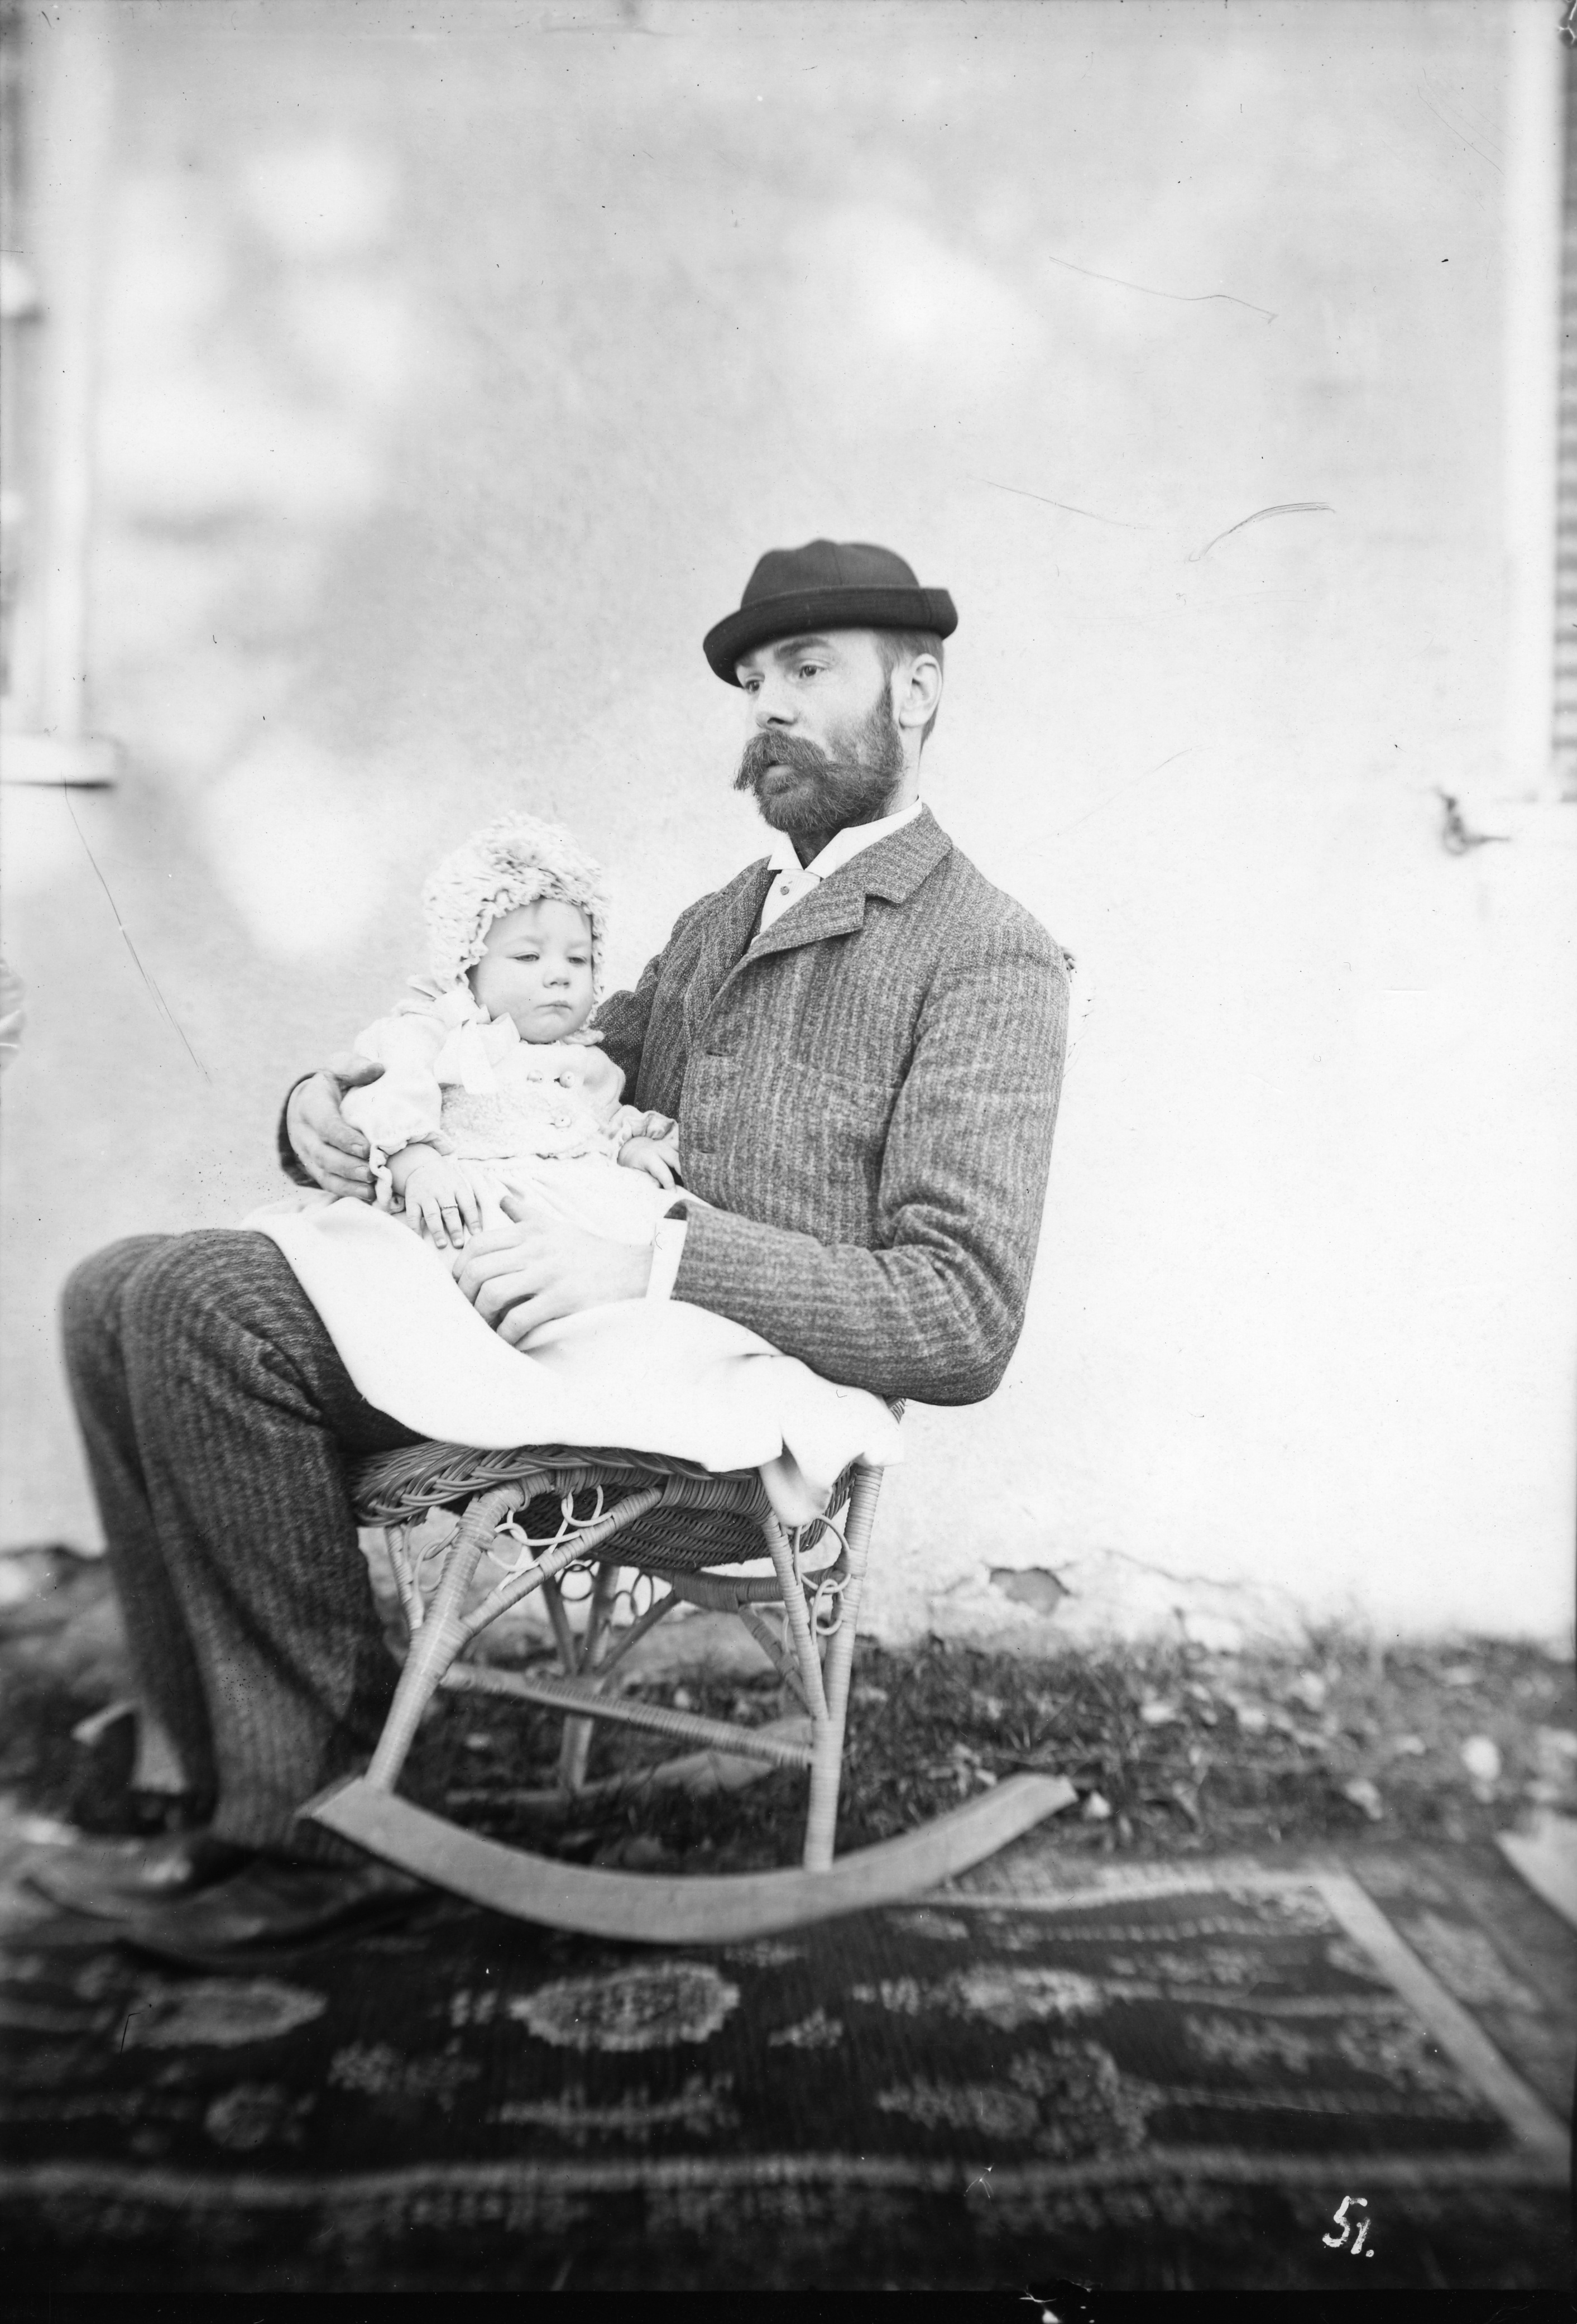 Black and white image of a man in a rocking chair with an infant in his lap